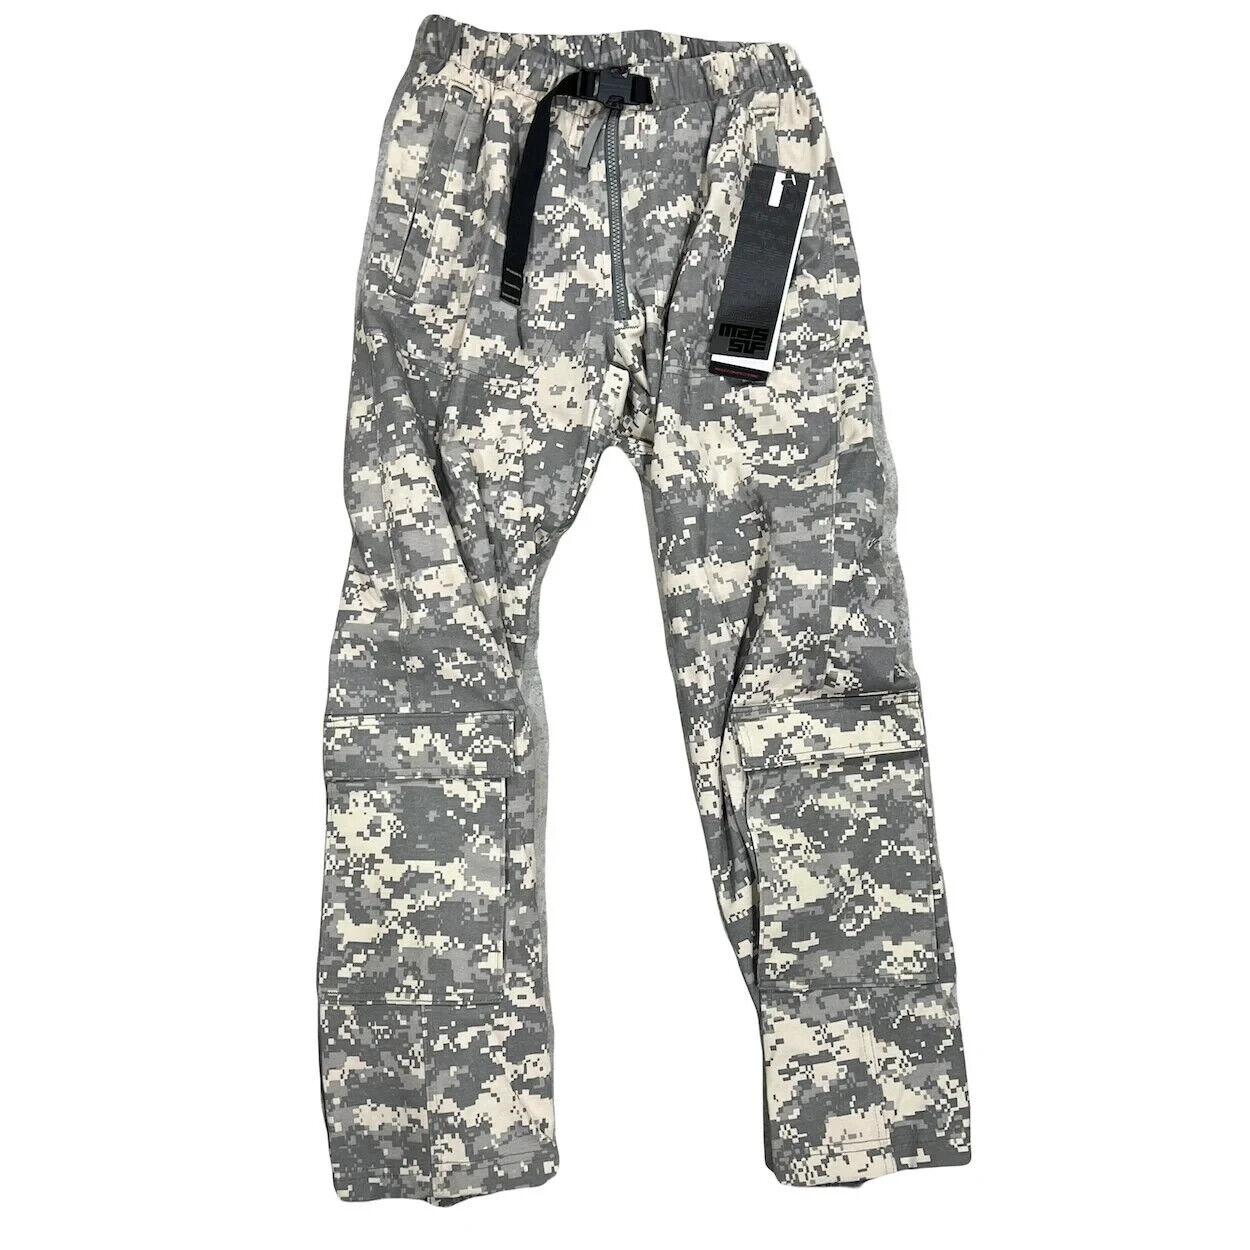 Small US Army Pants Genuine Acu Digital Nomex Flame Resistant Army Elements Pant